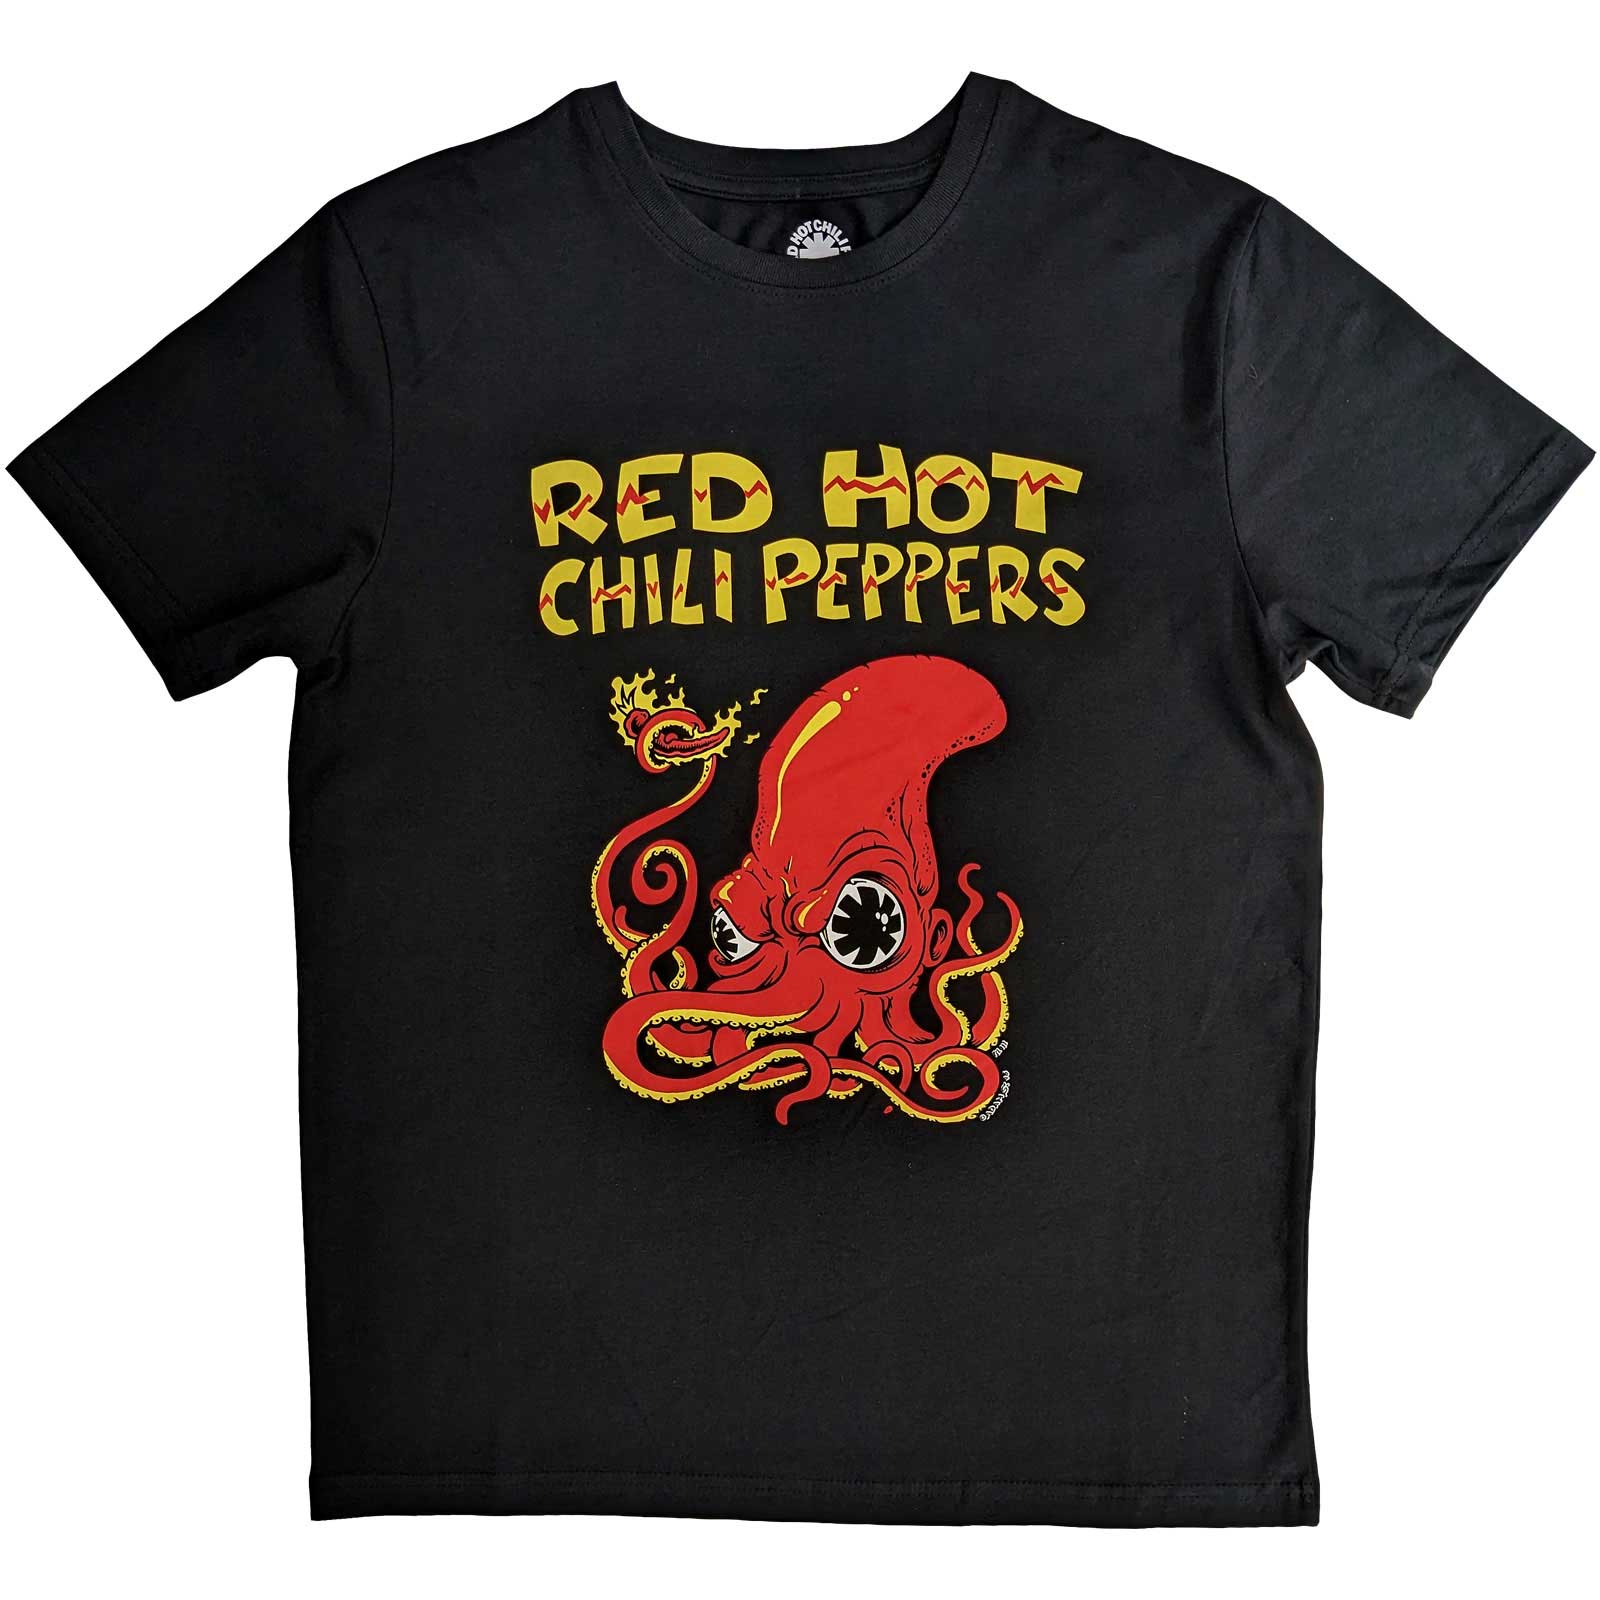 RED HOT CHILI PEPPERS Octopus